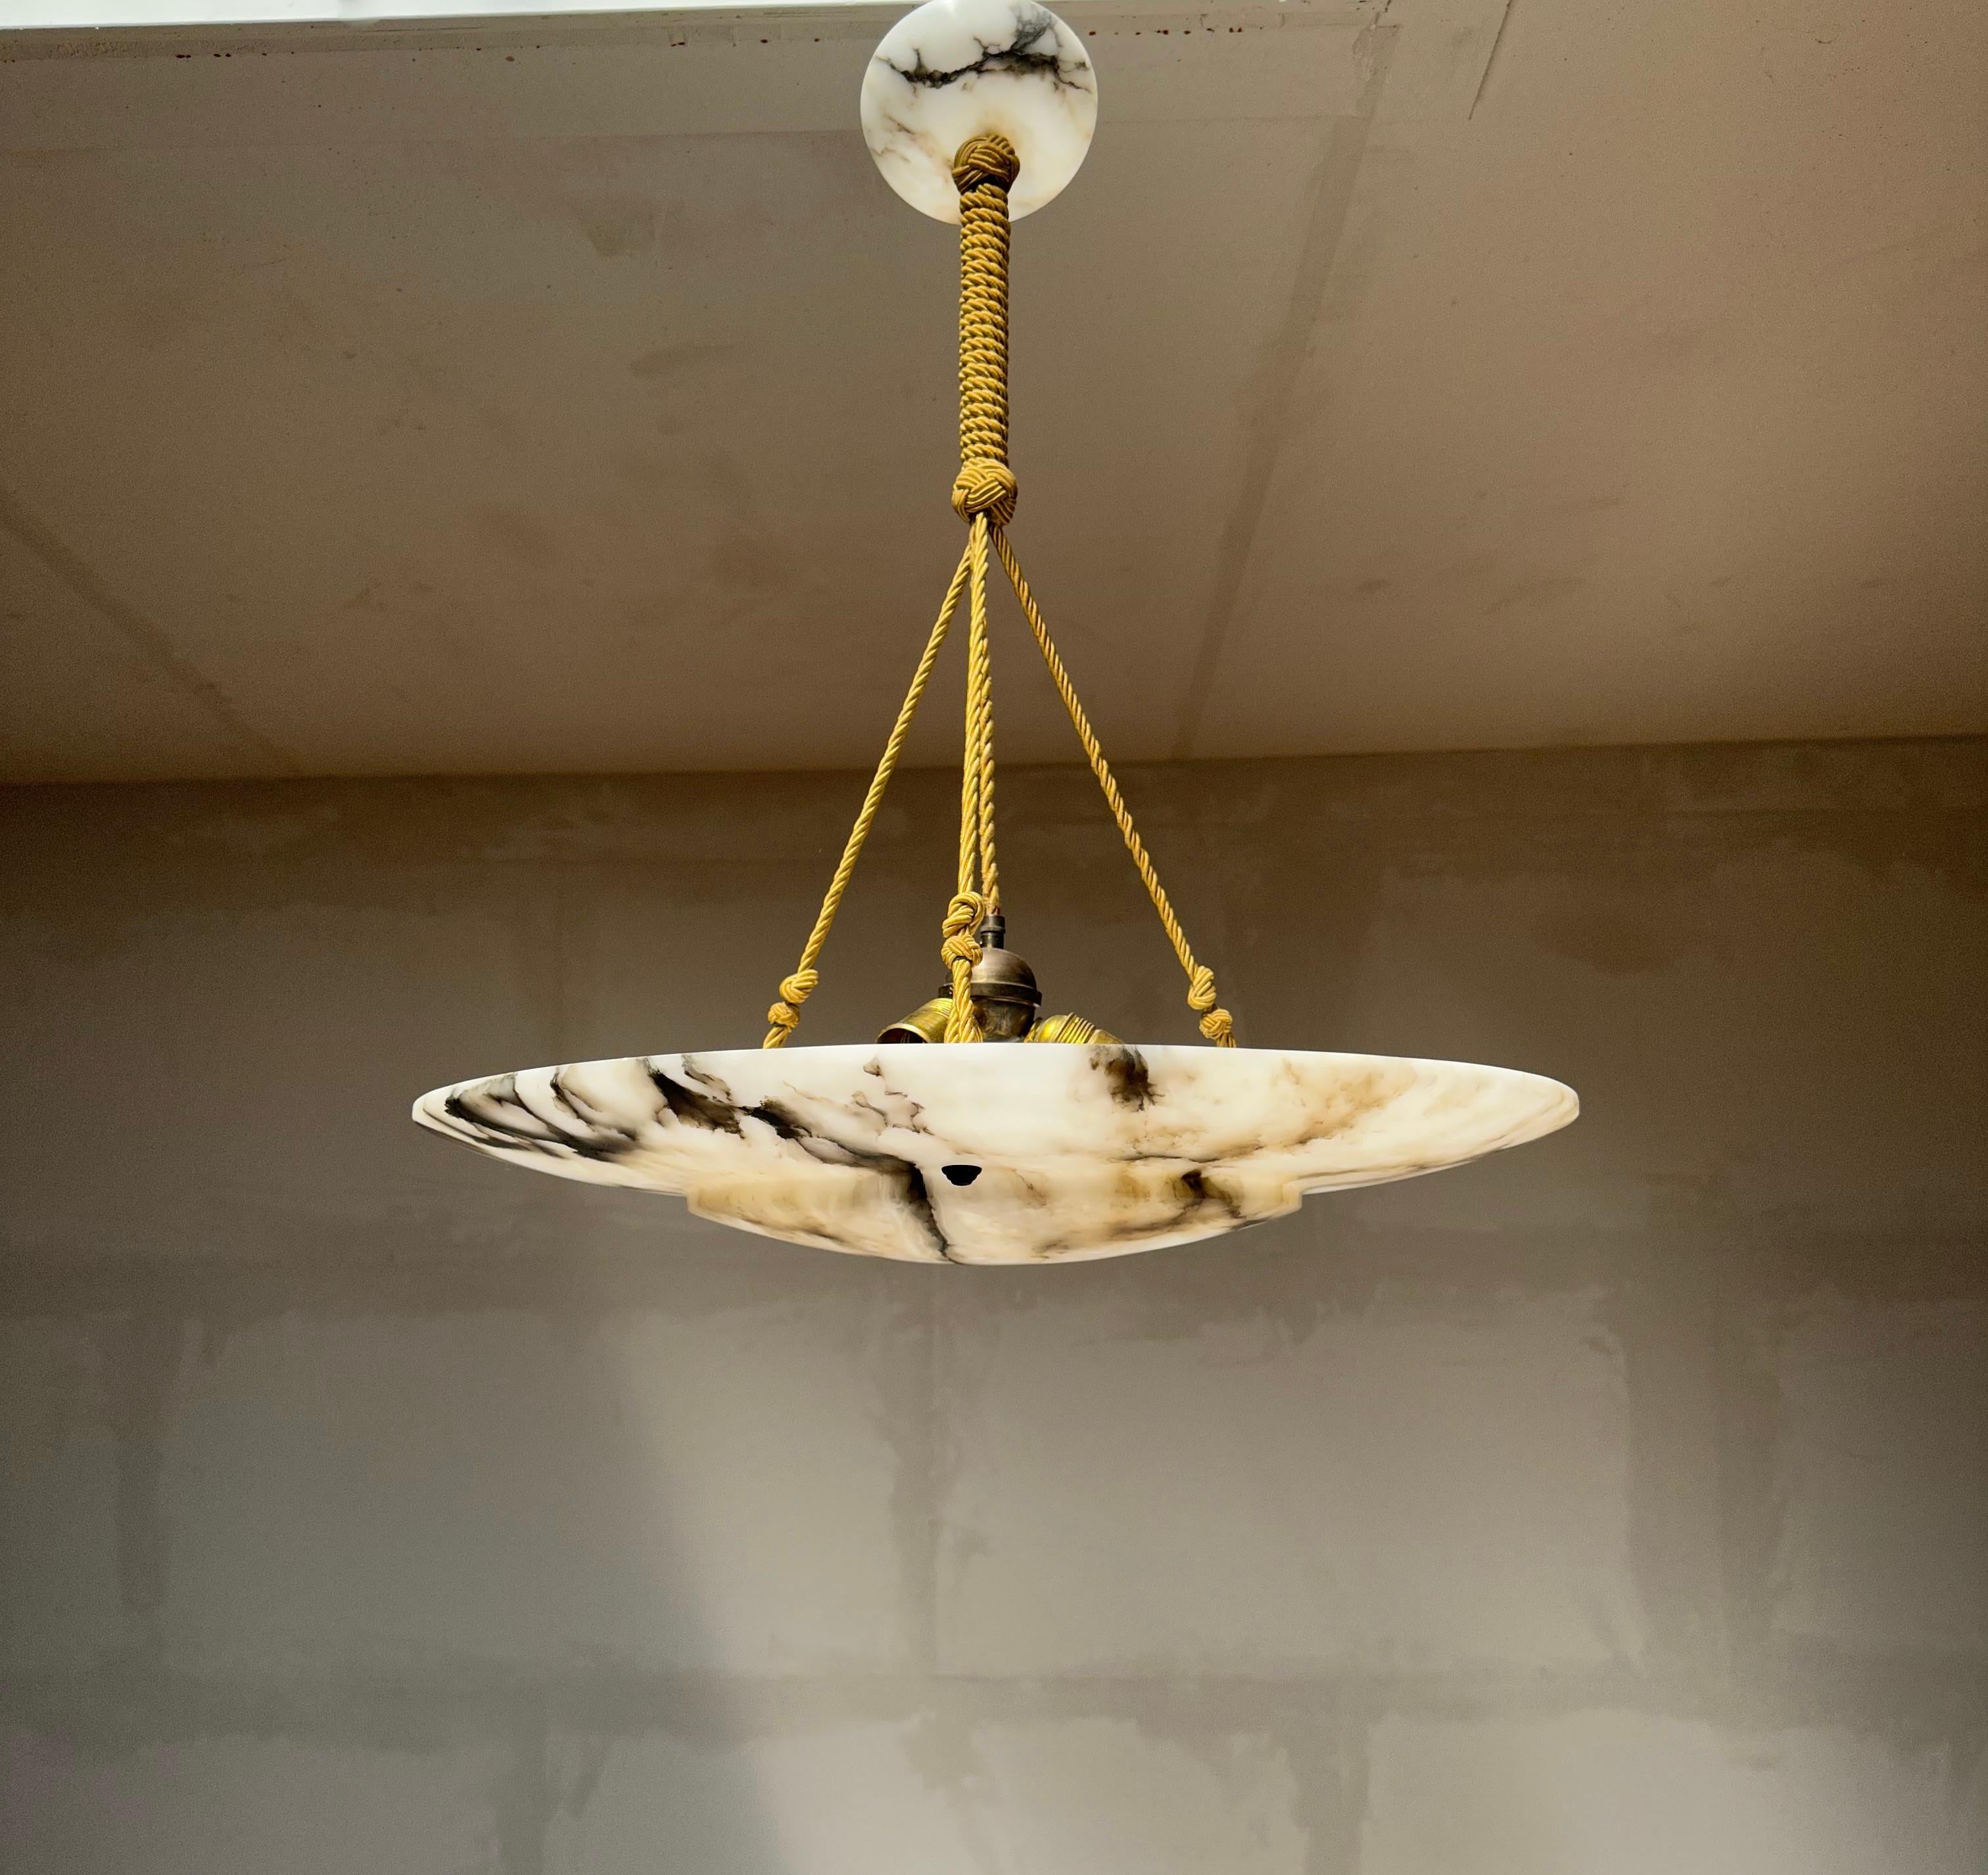 One of the largest antique alabaster flush mounts from the early 1900s.

This rare, almost flat and extra large size alabaster light fixture also is of a beautiful design. The beautiful and polished alabaster shade comes with a layered design